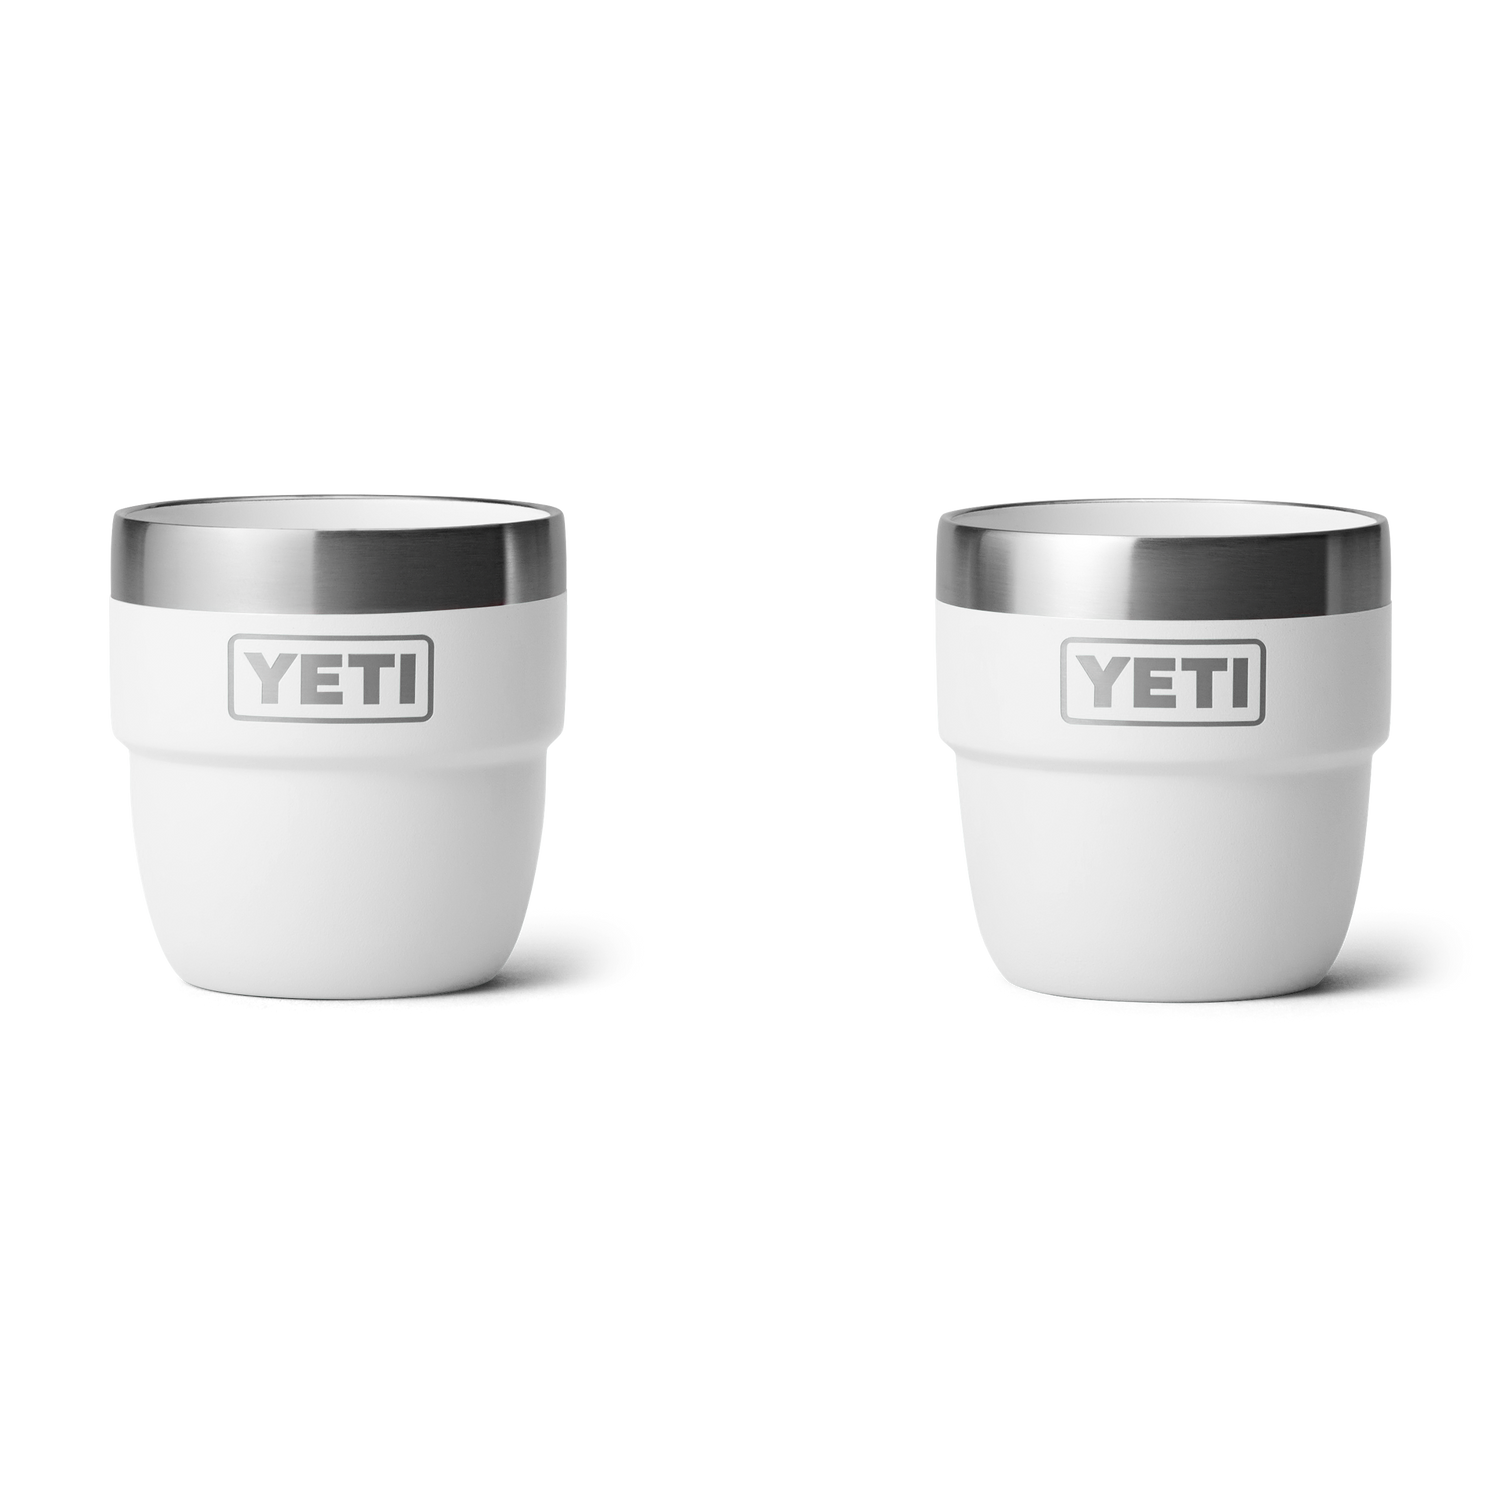 YETI - Just launched: the new Bimini and Offshore